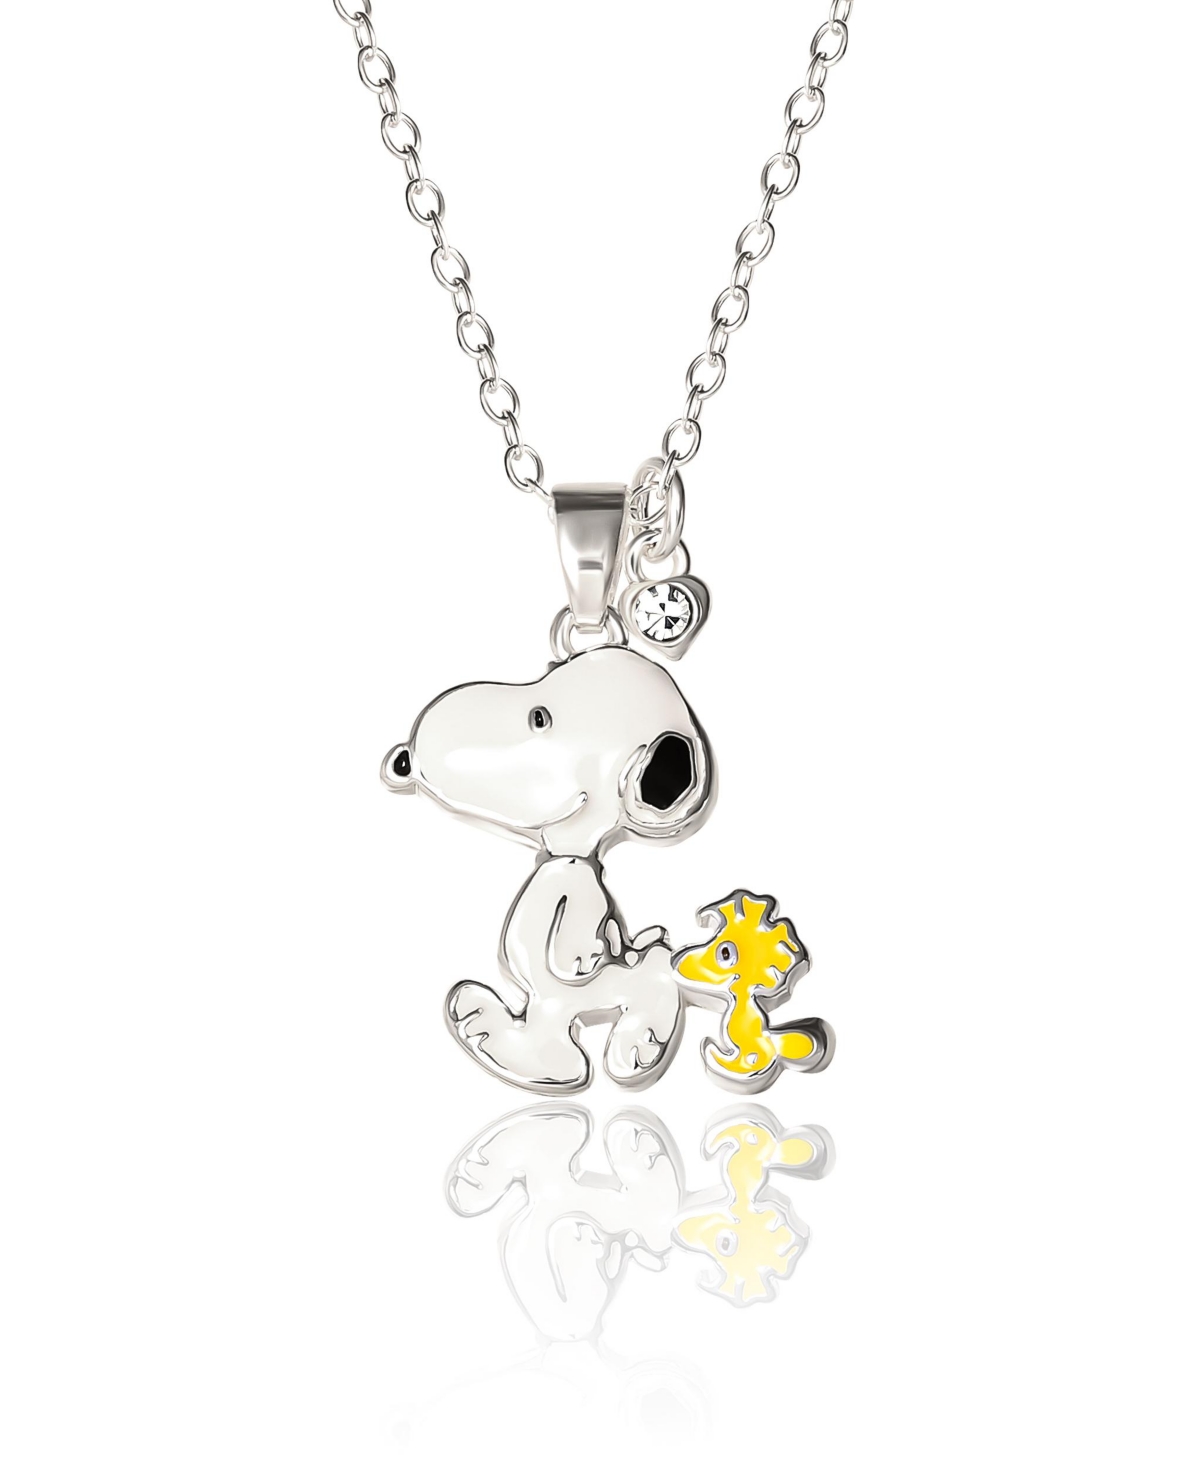 Snoopy and Woodstock 3D Pendant Necklace, 16 + 2'' Chain - Silver tone, white, yellow